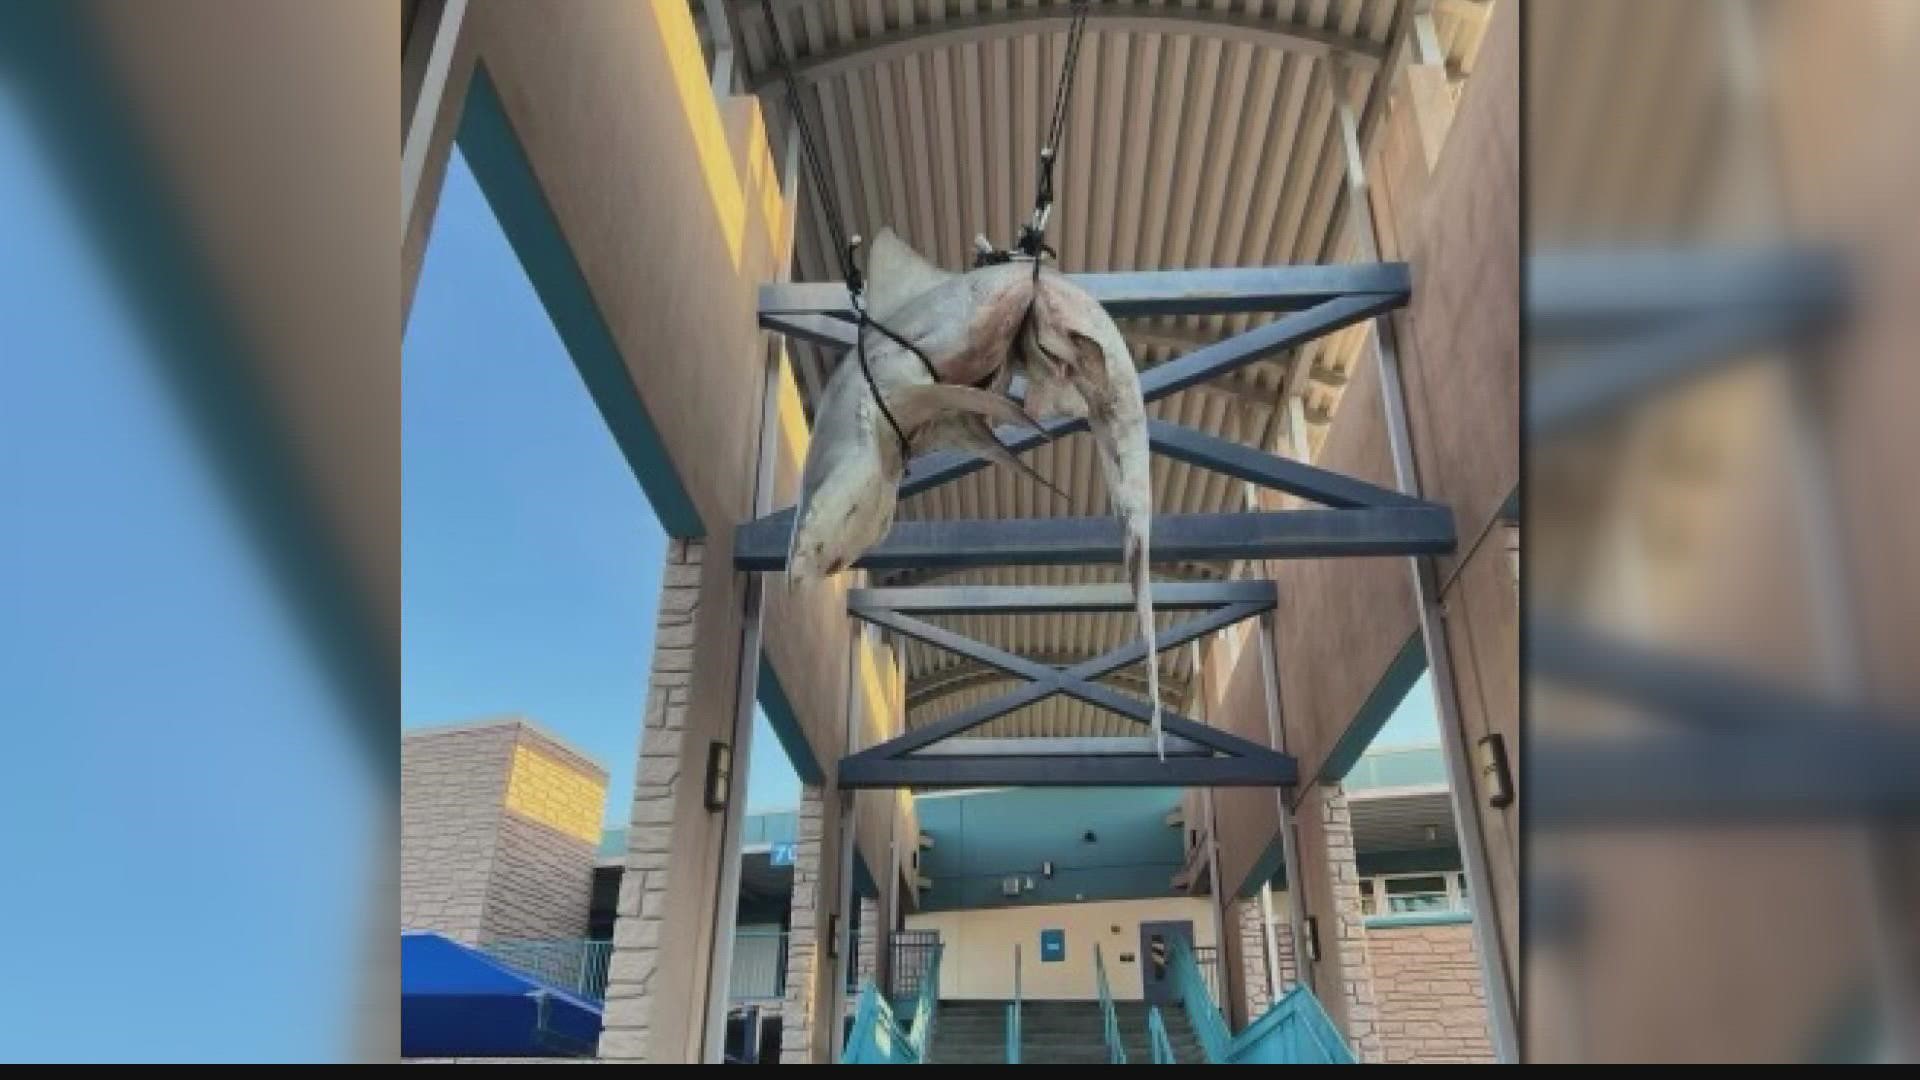 Animal rights advocates PETA sent a letter to St Johns County School Superintendent offering "empathy lessons" after photos of the prank went viral.